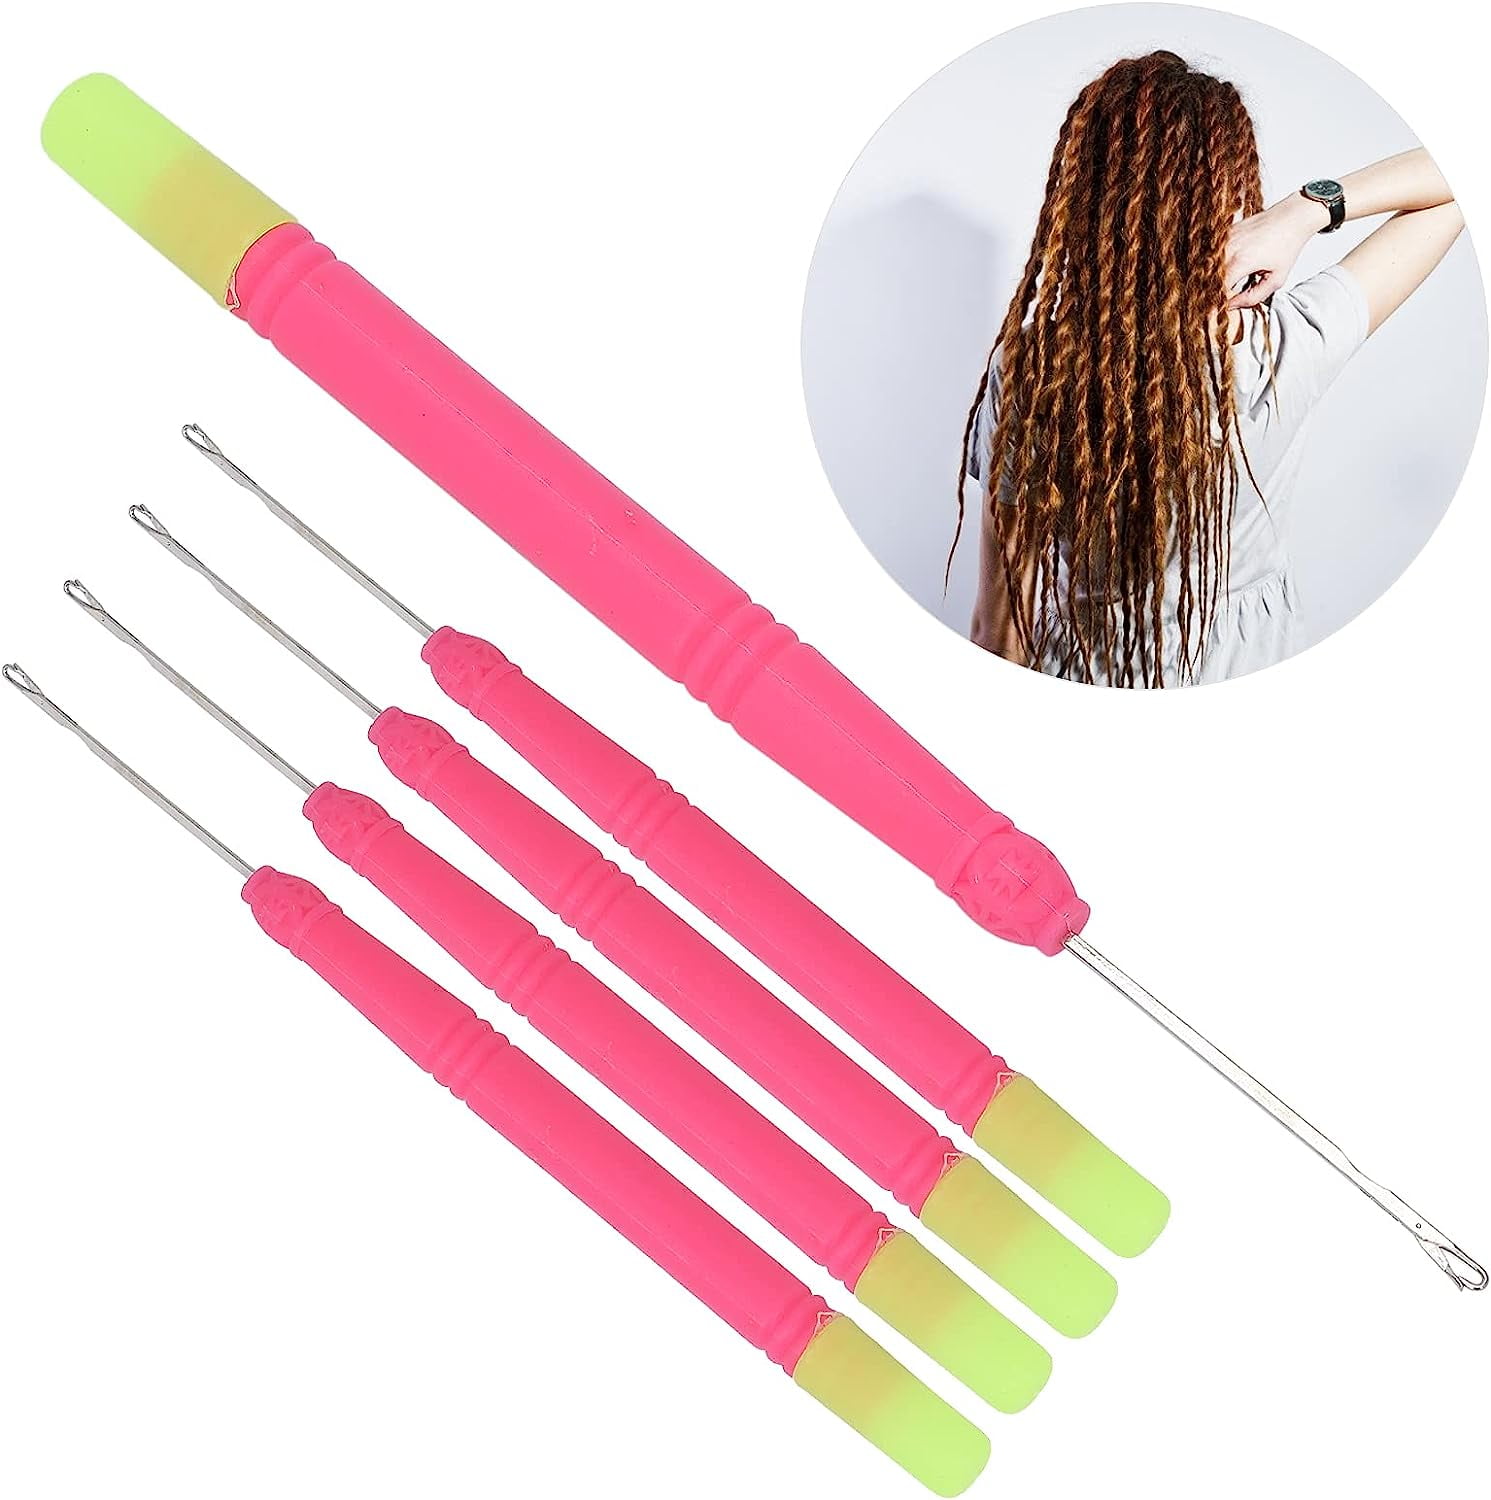 5 Pack Of Crochet Braid Hook Needle For Braiding Hair by Annie – Waba Hair  and Beauty Supply